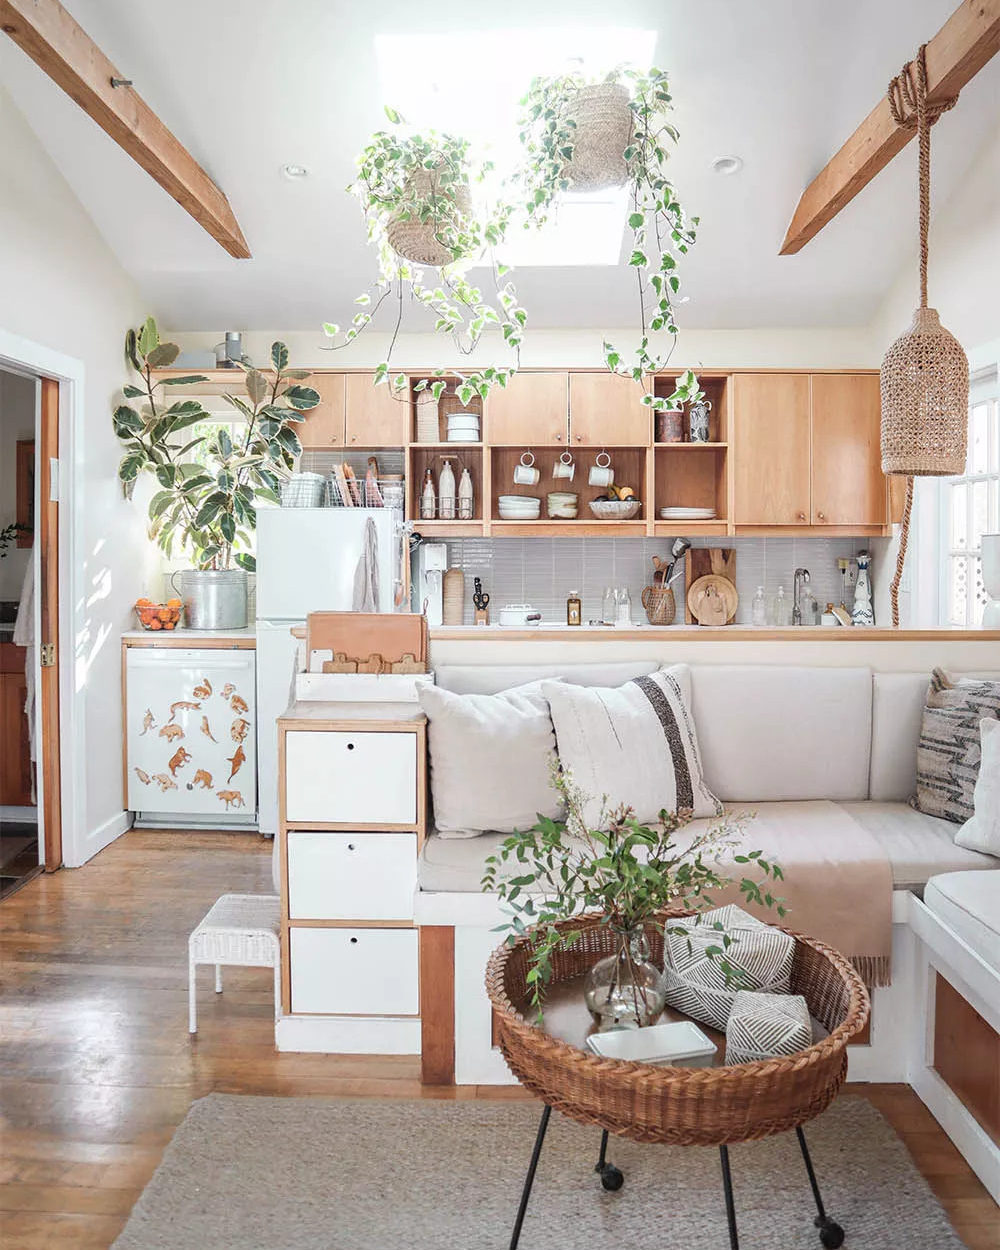 17 Tips & Tricks for Small Space Living